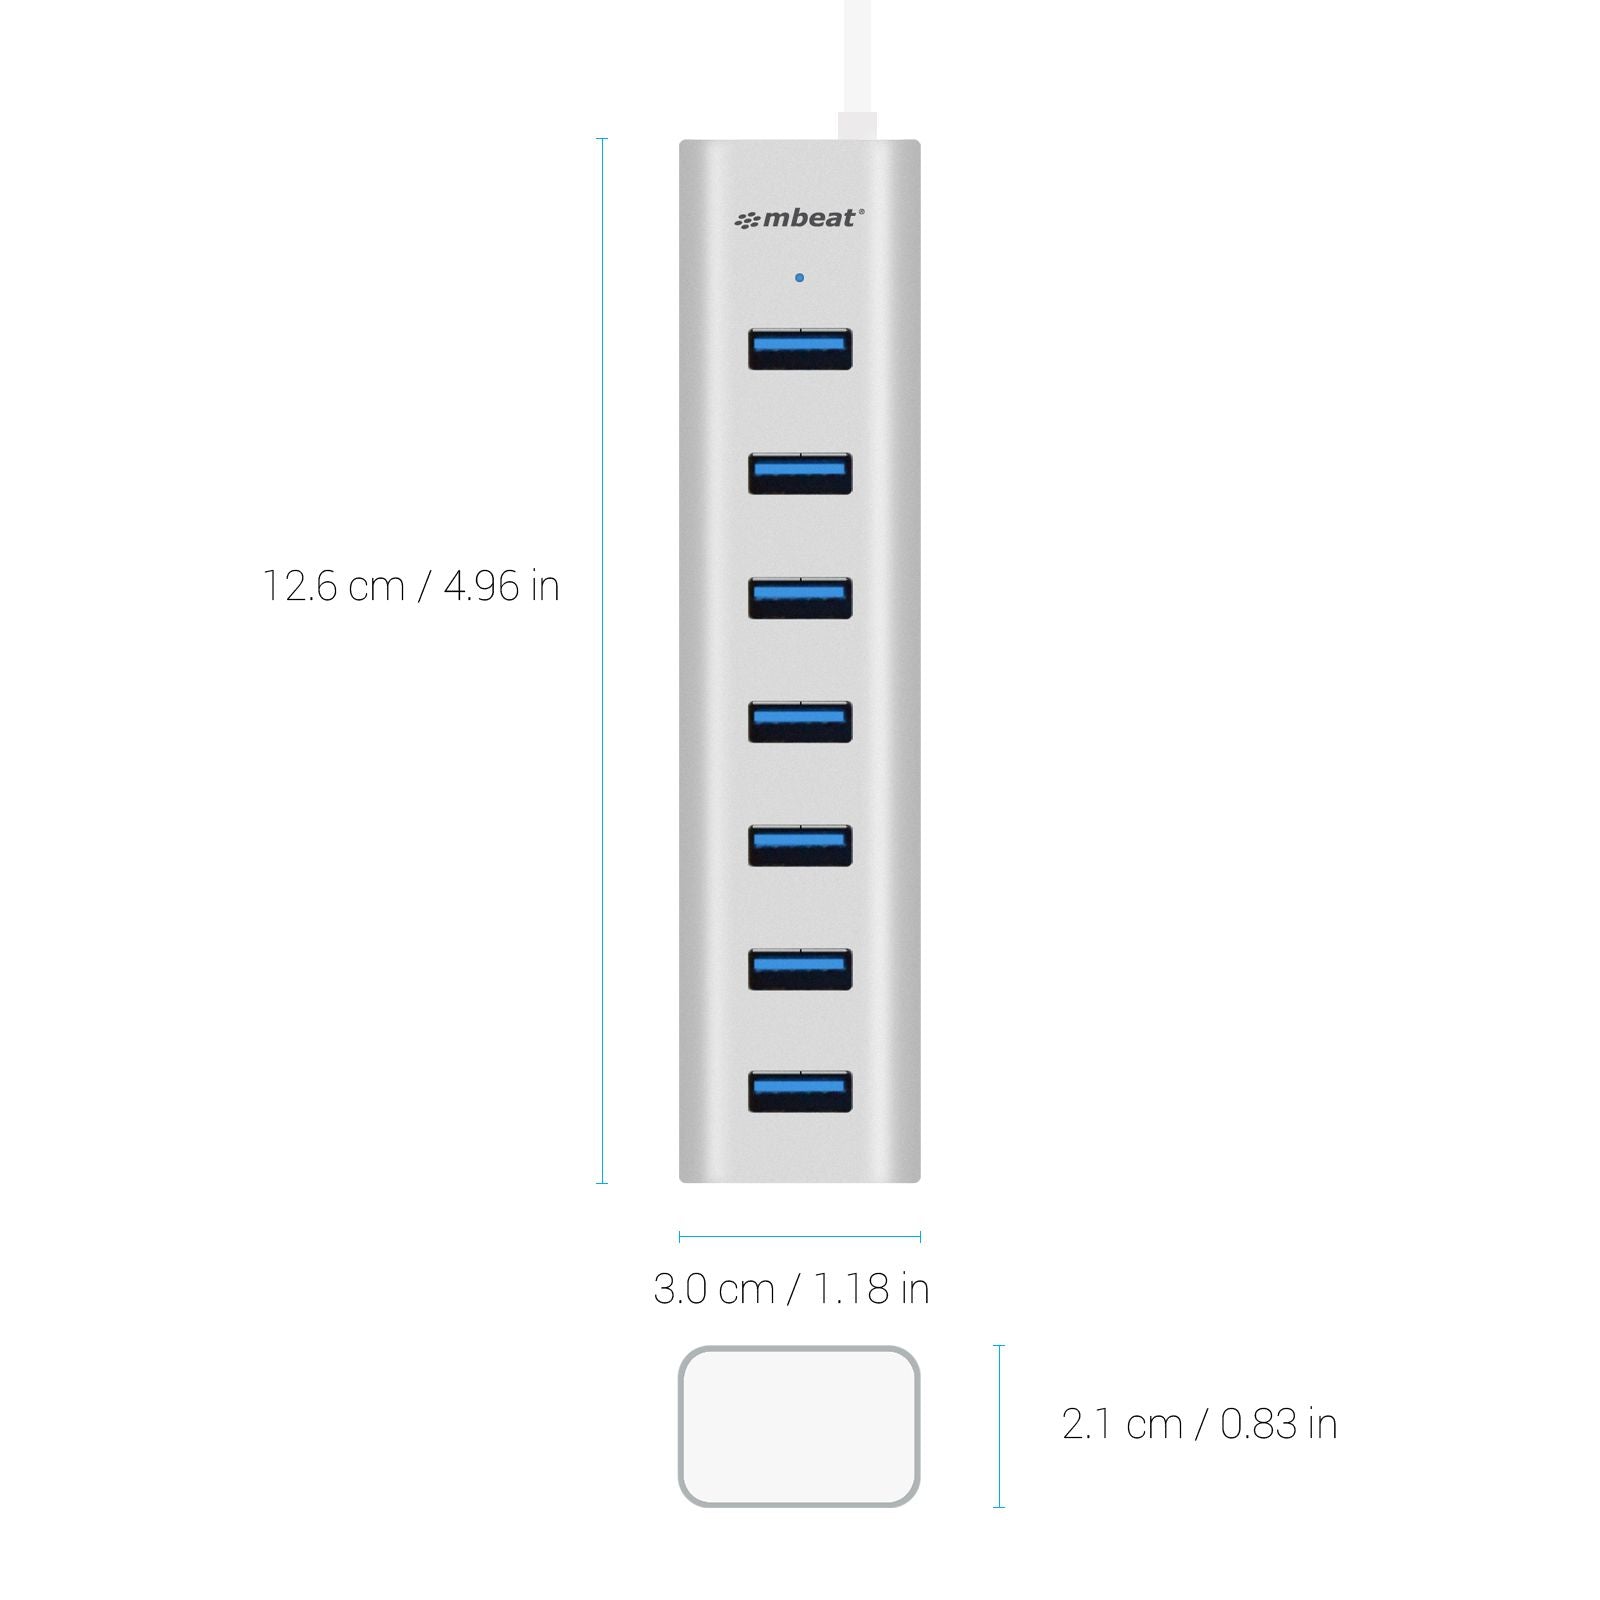 7-Port USB 3.0 Aluminum Slim Hub With Power For PC and MAC